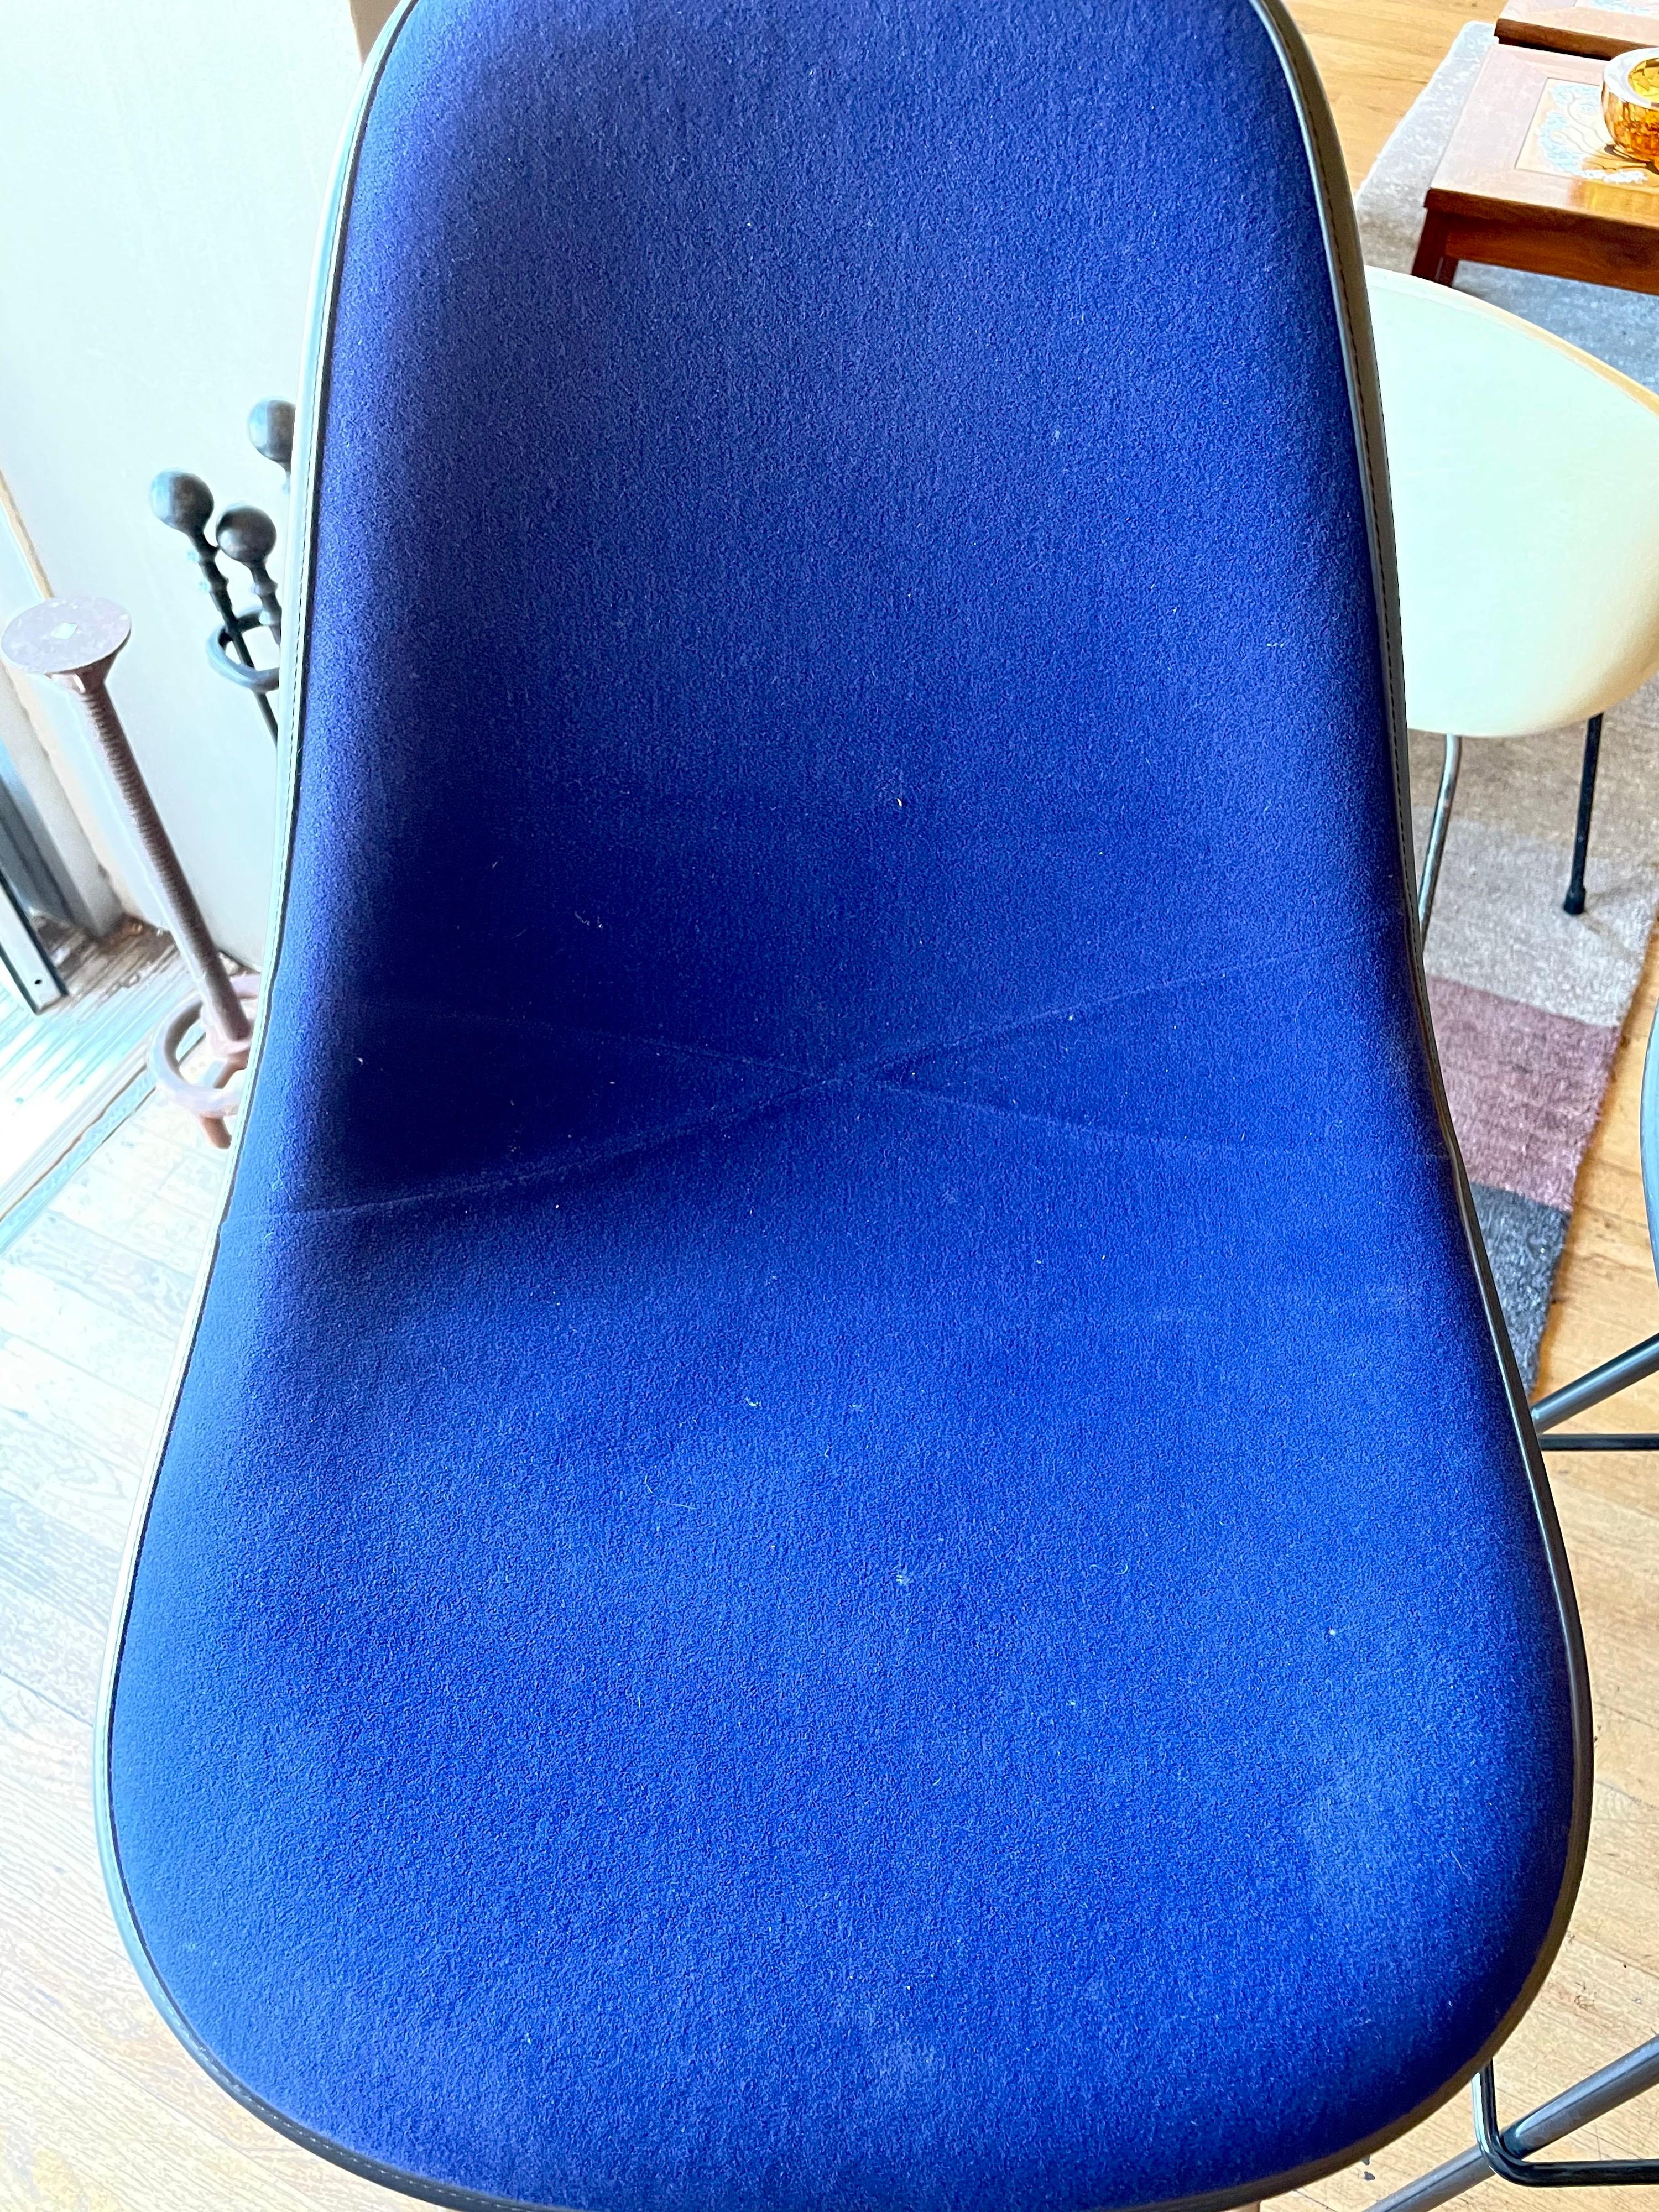 Pair of Barstools Designed by Eames for Herman Miller with Blue Velvet Covers In Good Condition For Sale In San Diego, CA